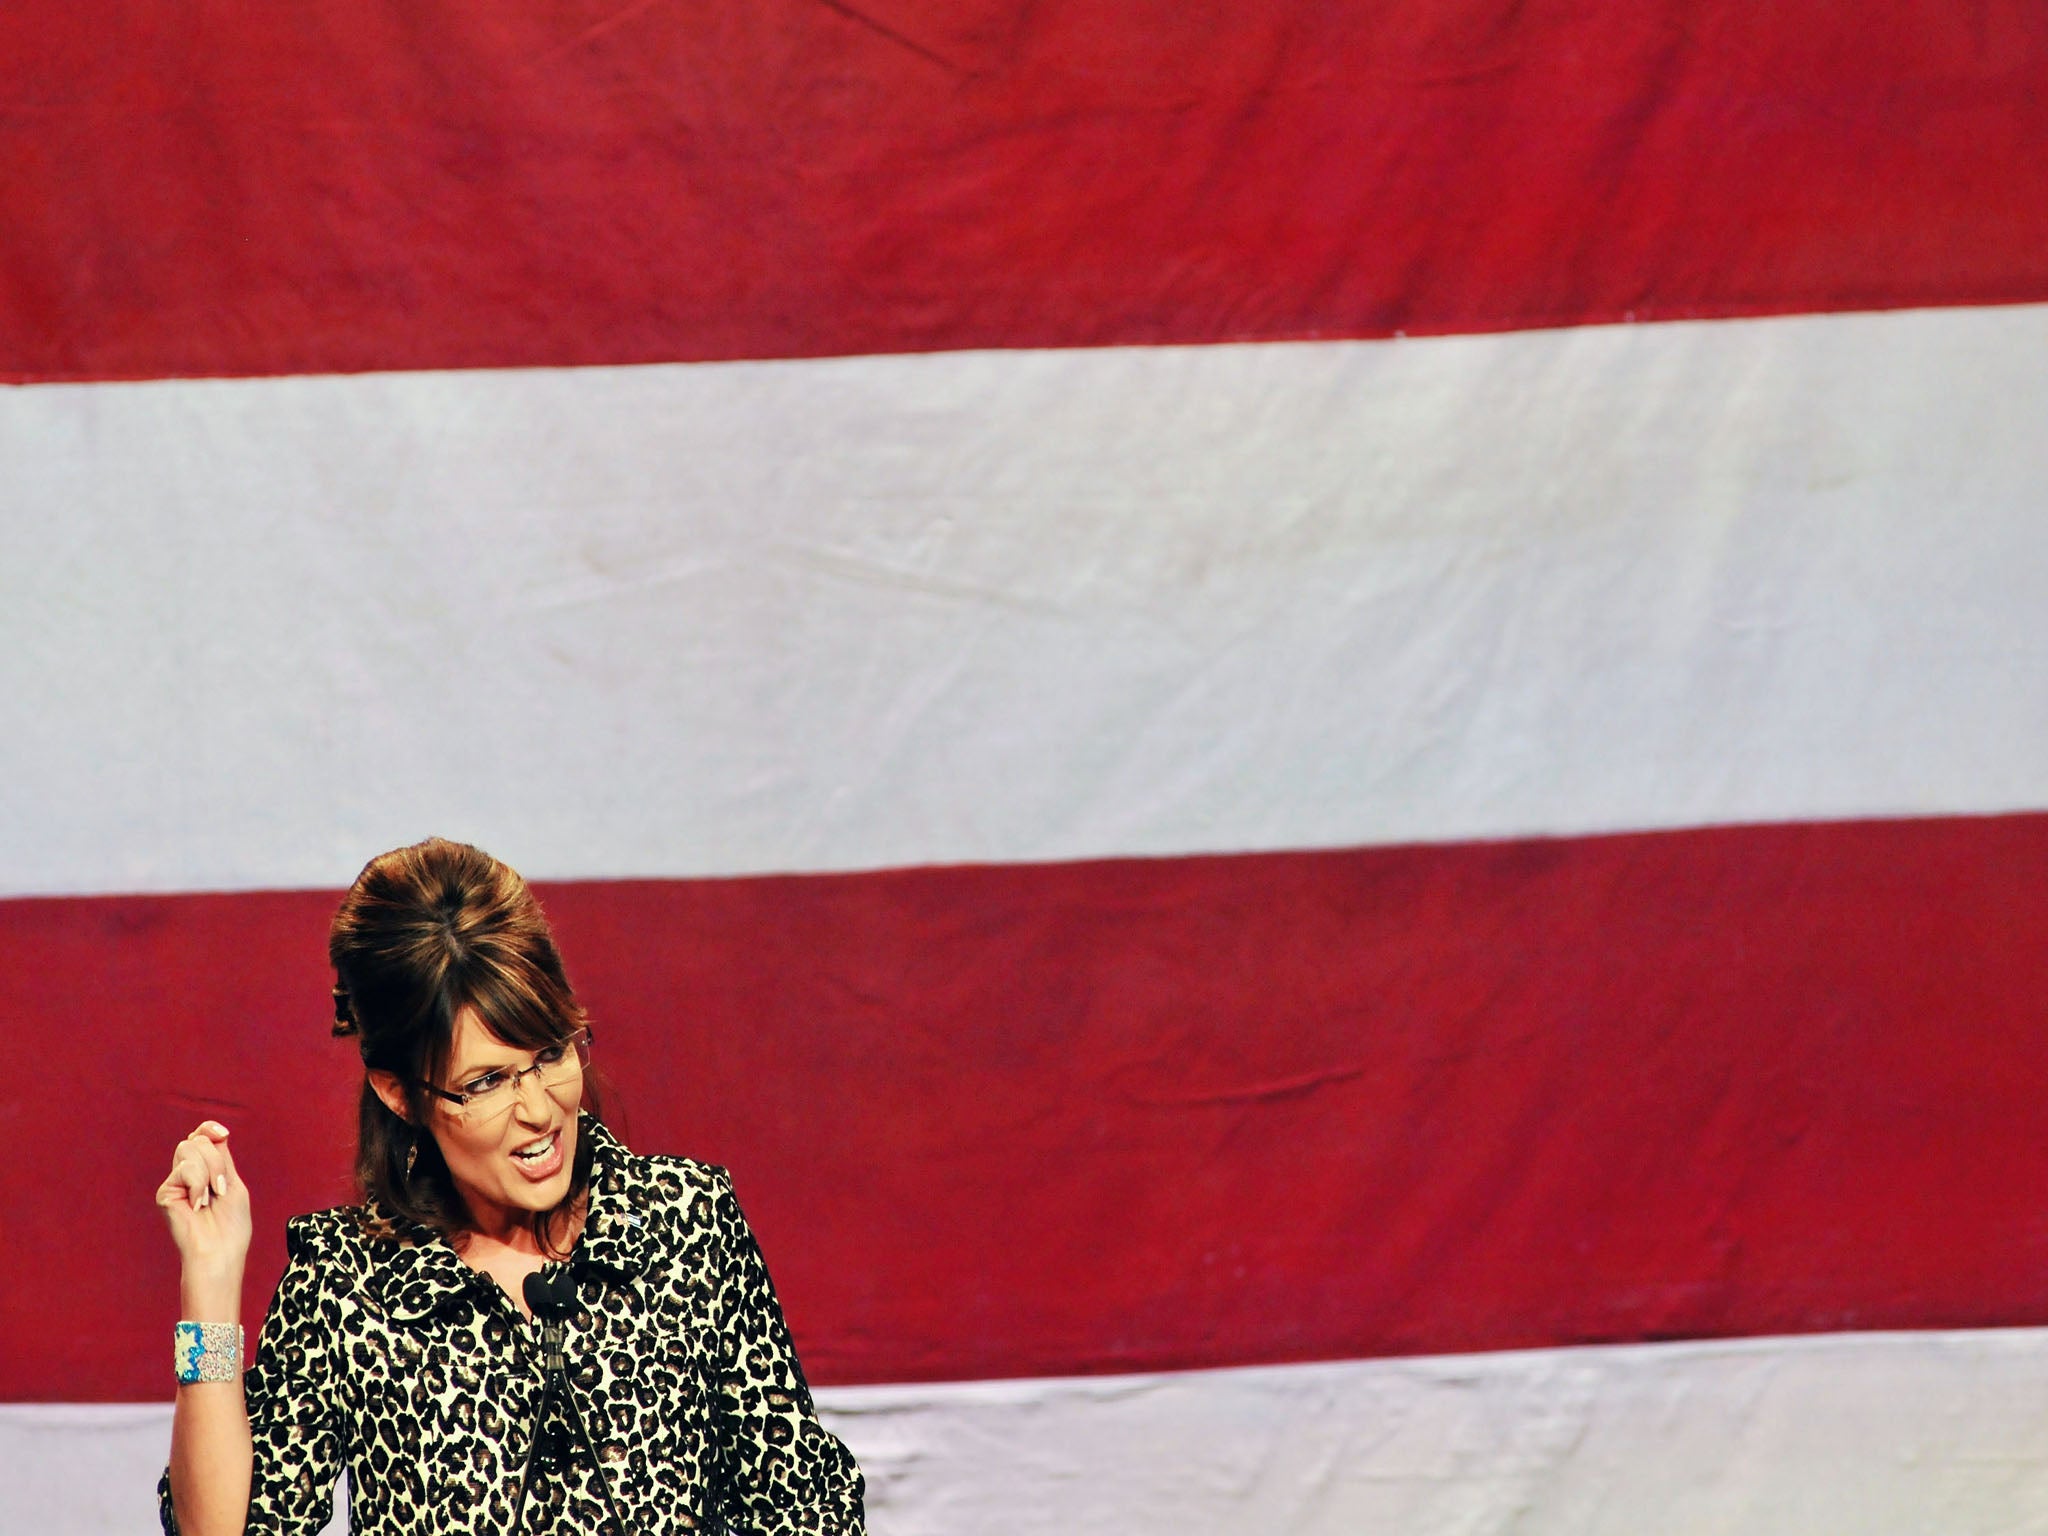 Sarah Palin said Thursday that she has not ruled out running for president in 2016